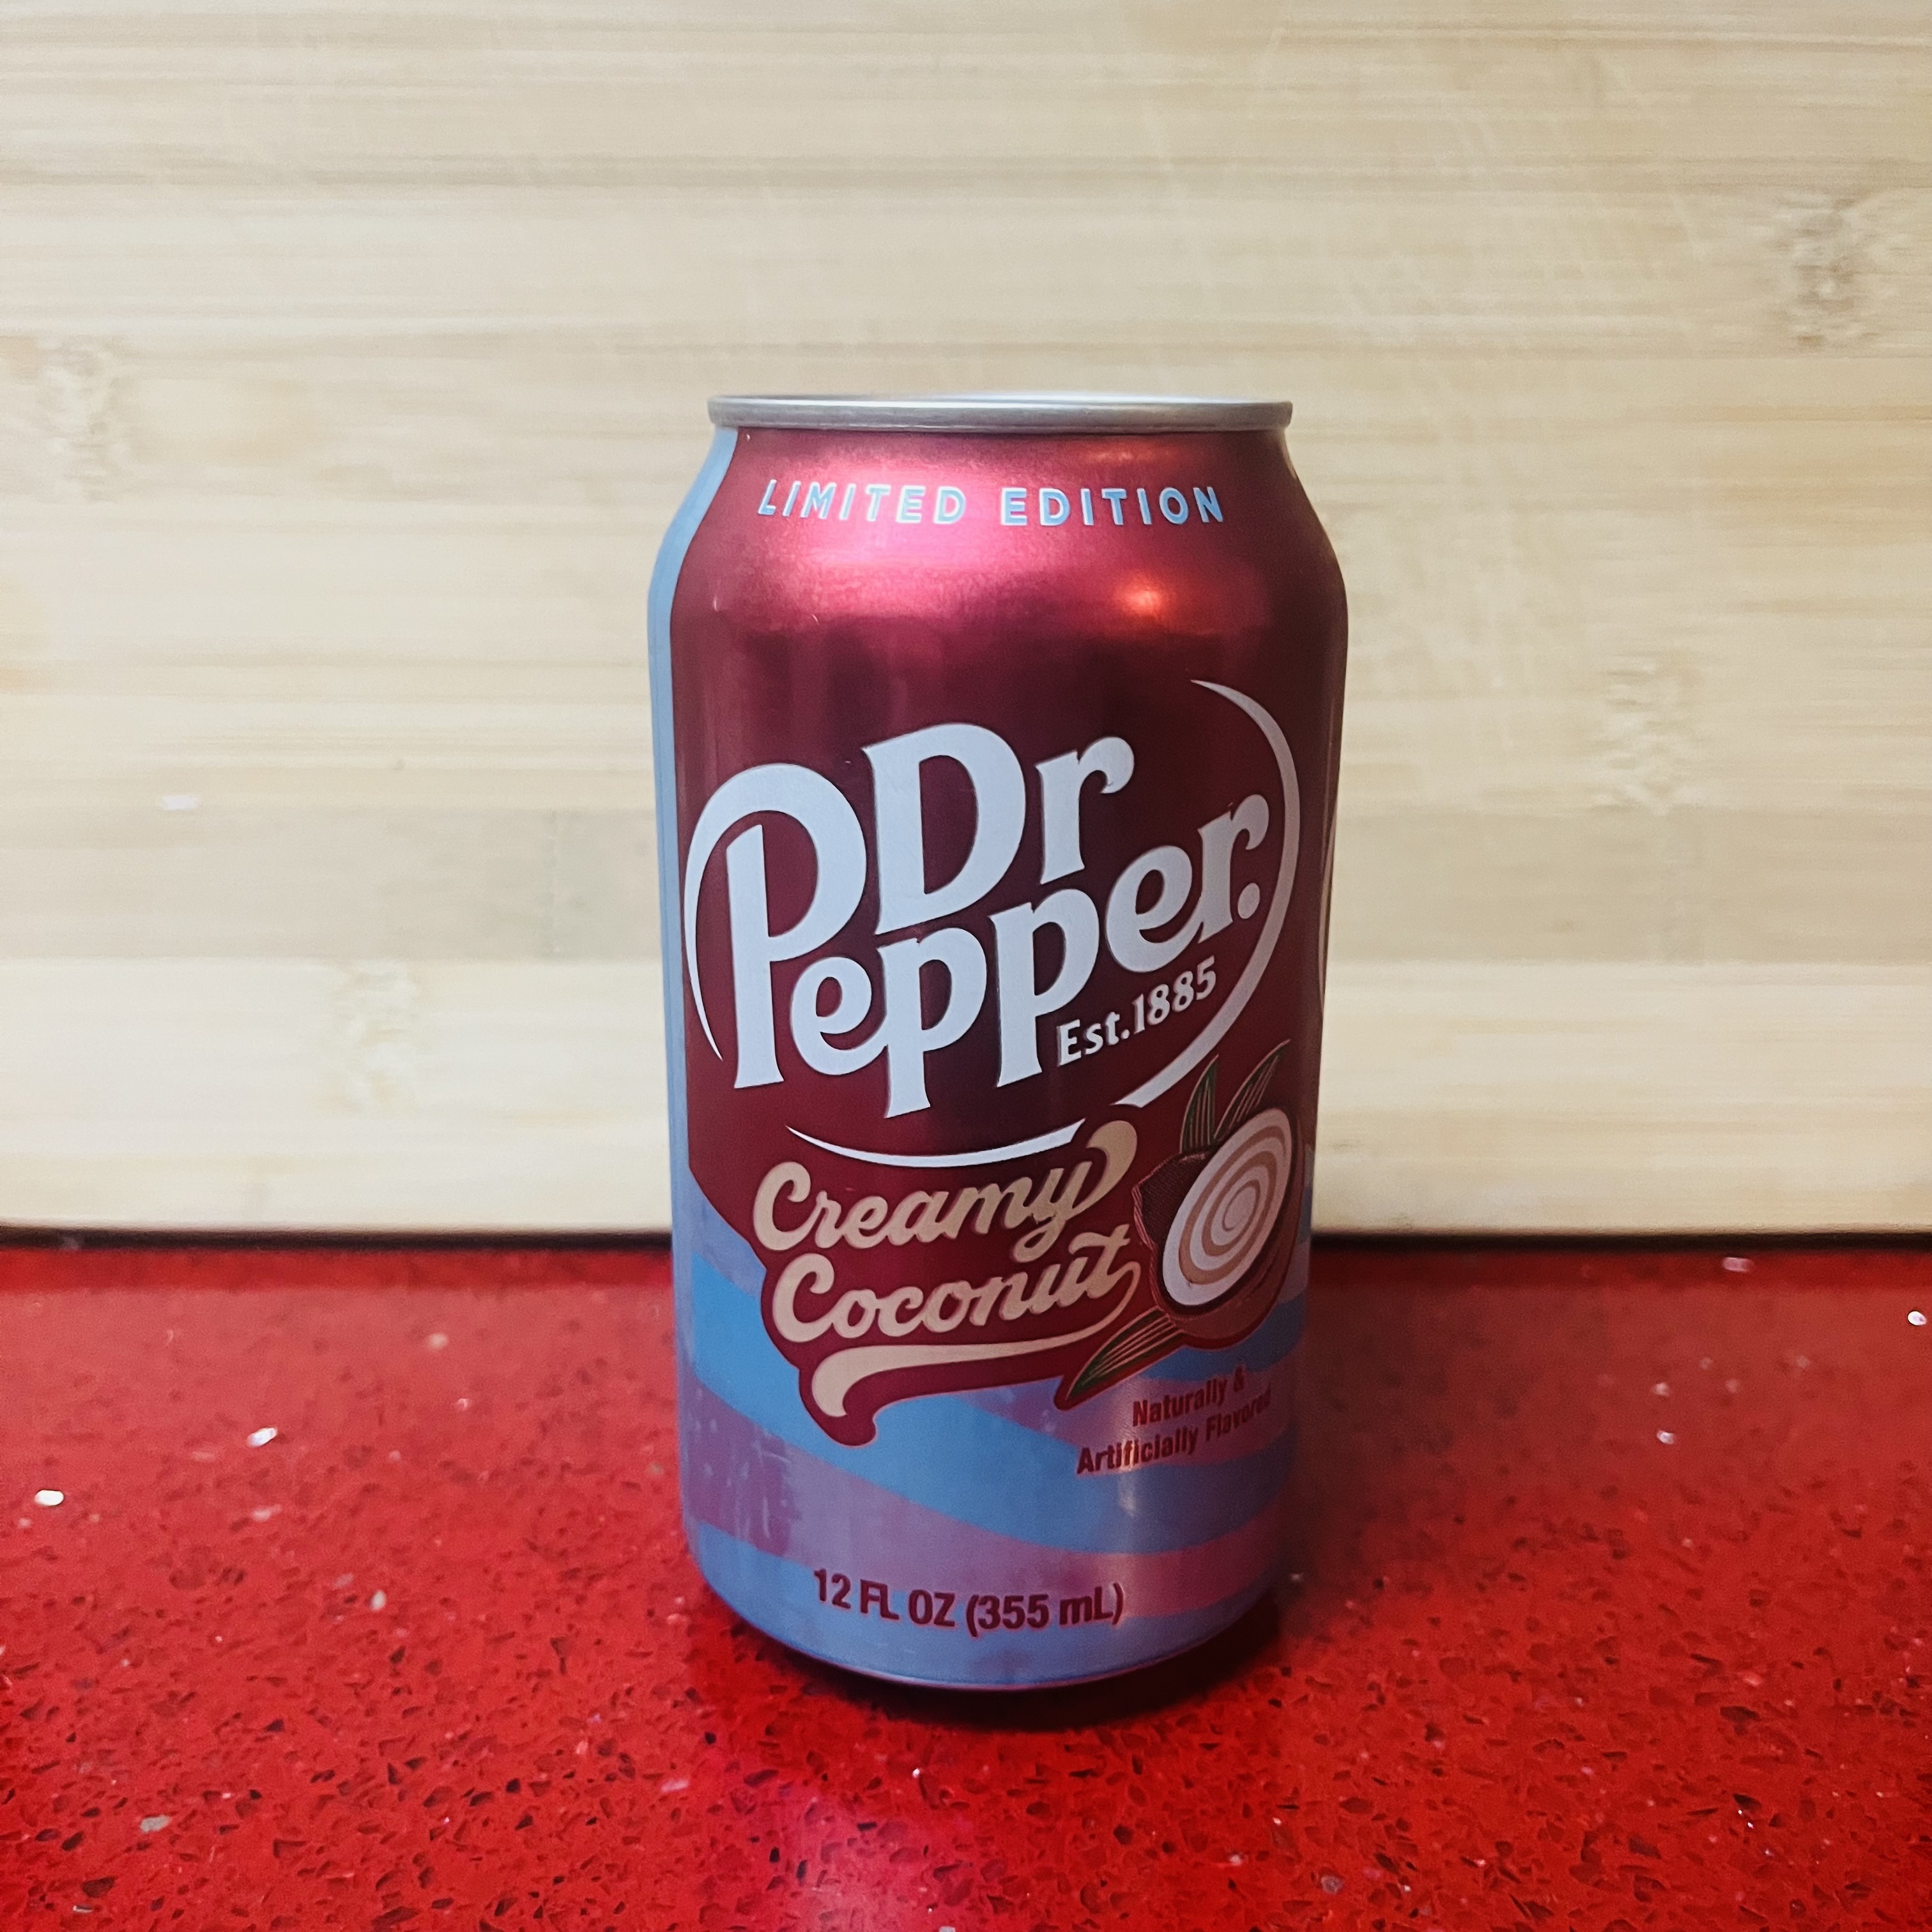 We Tried Dr. Pepper’s New Creamy Coconut Flavor — Should You?